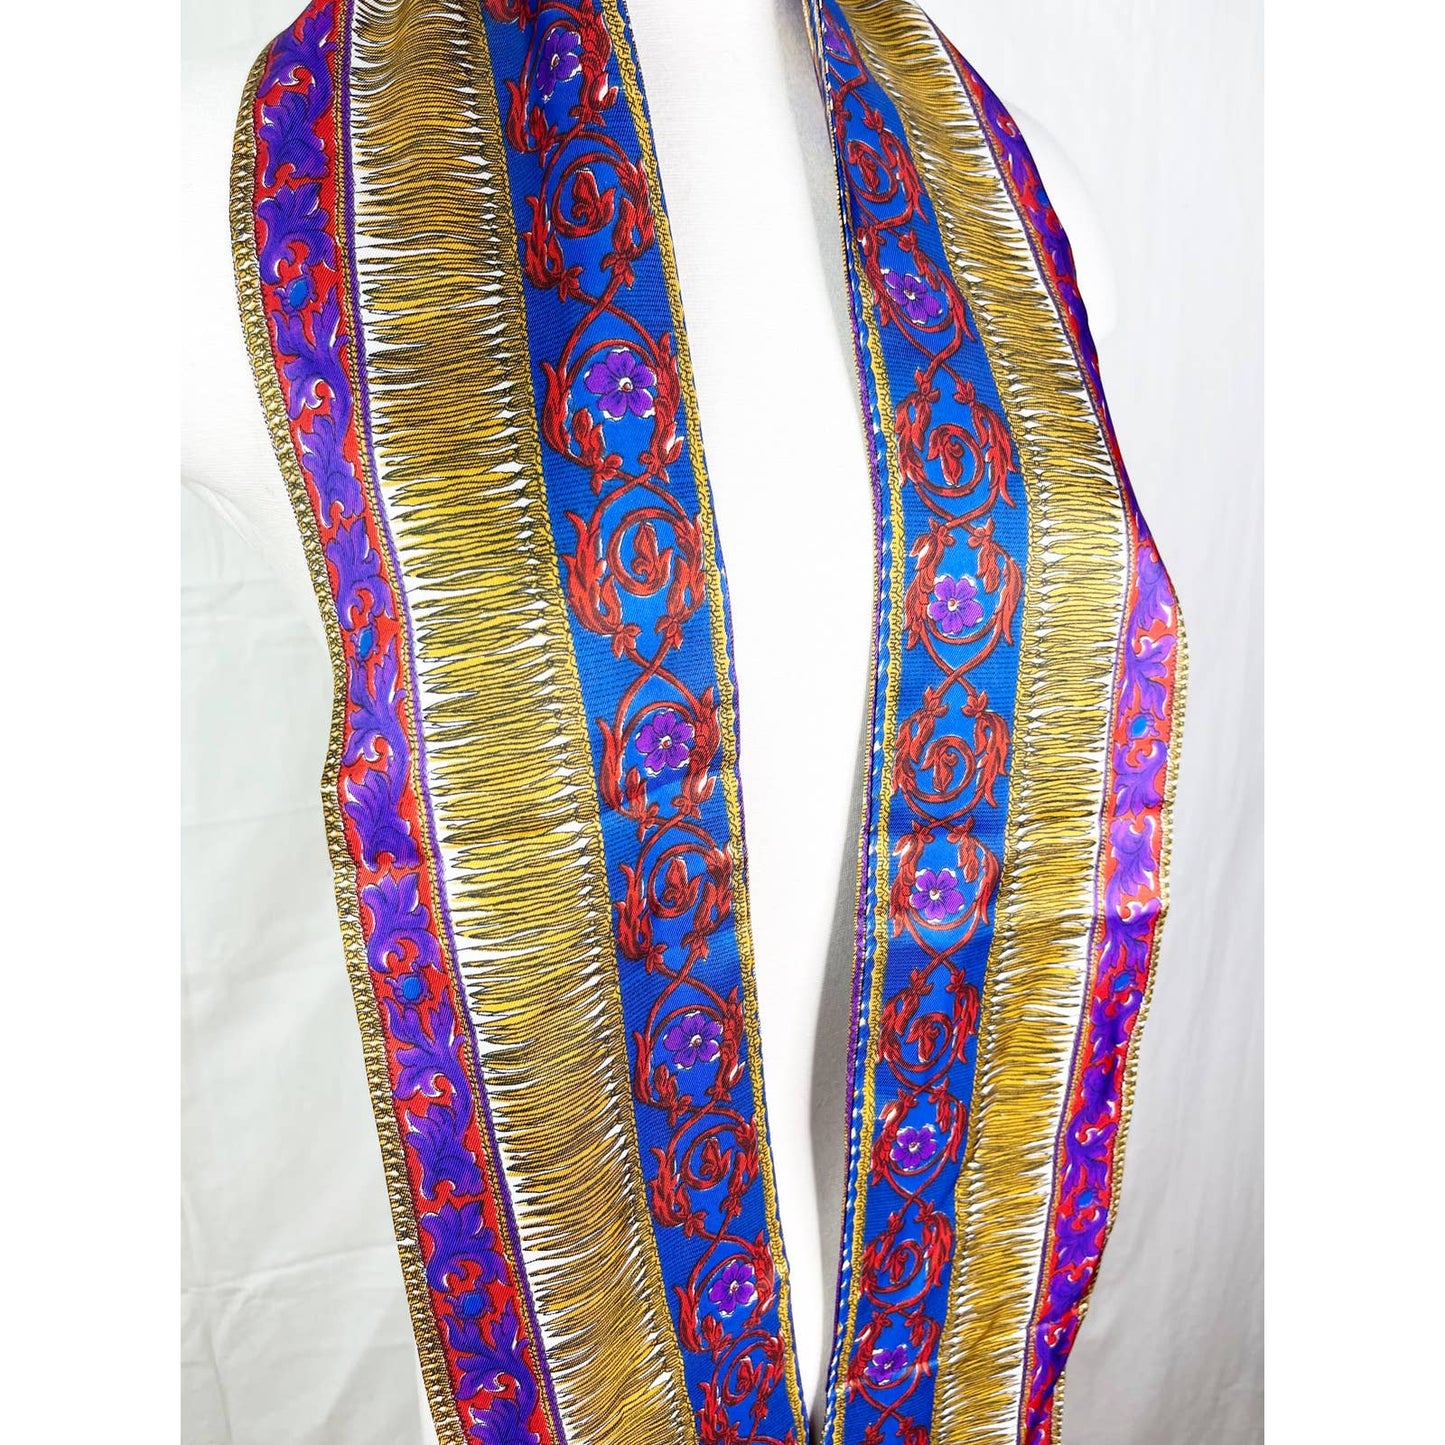 unknownVintage Multicolor Twilly Scarf - Gold/Blue/Red/Purple - Black Dog Vintage